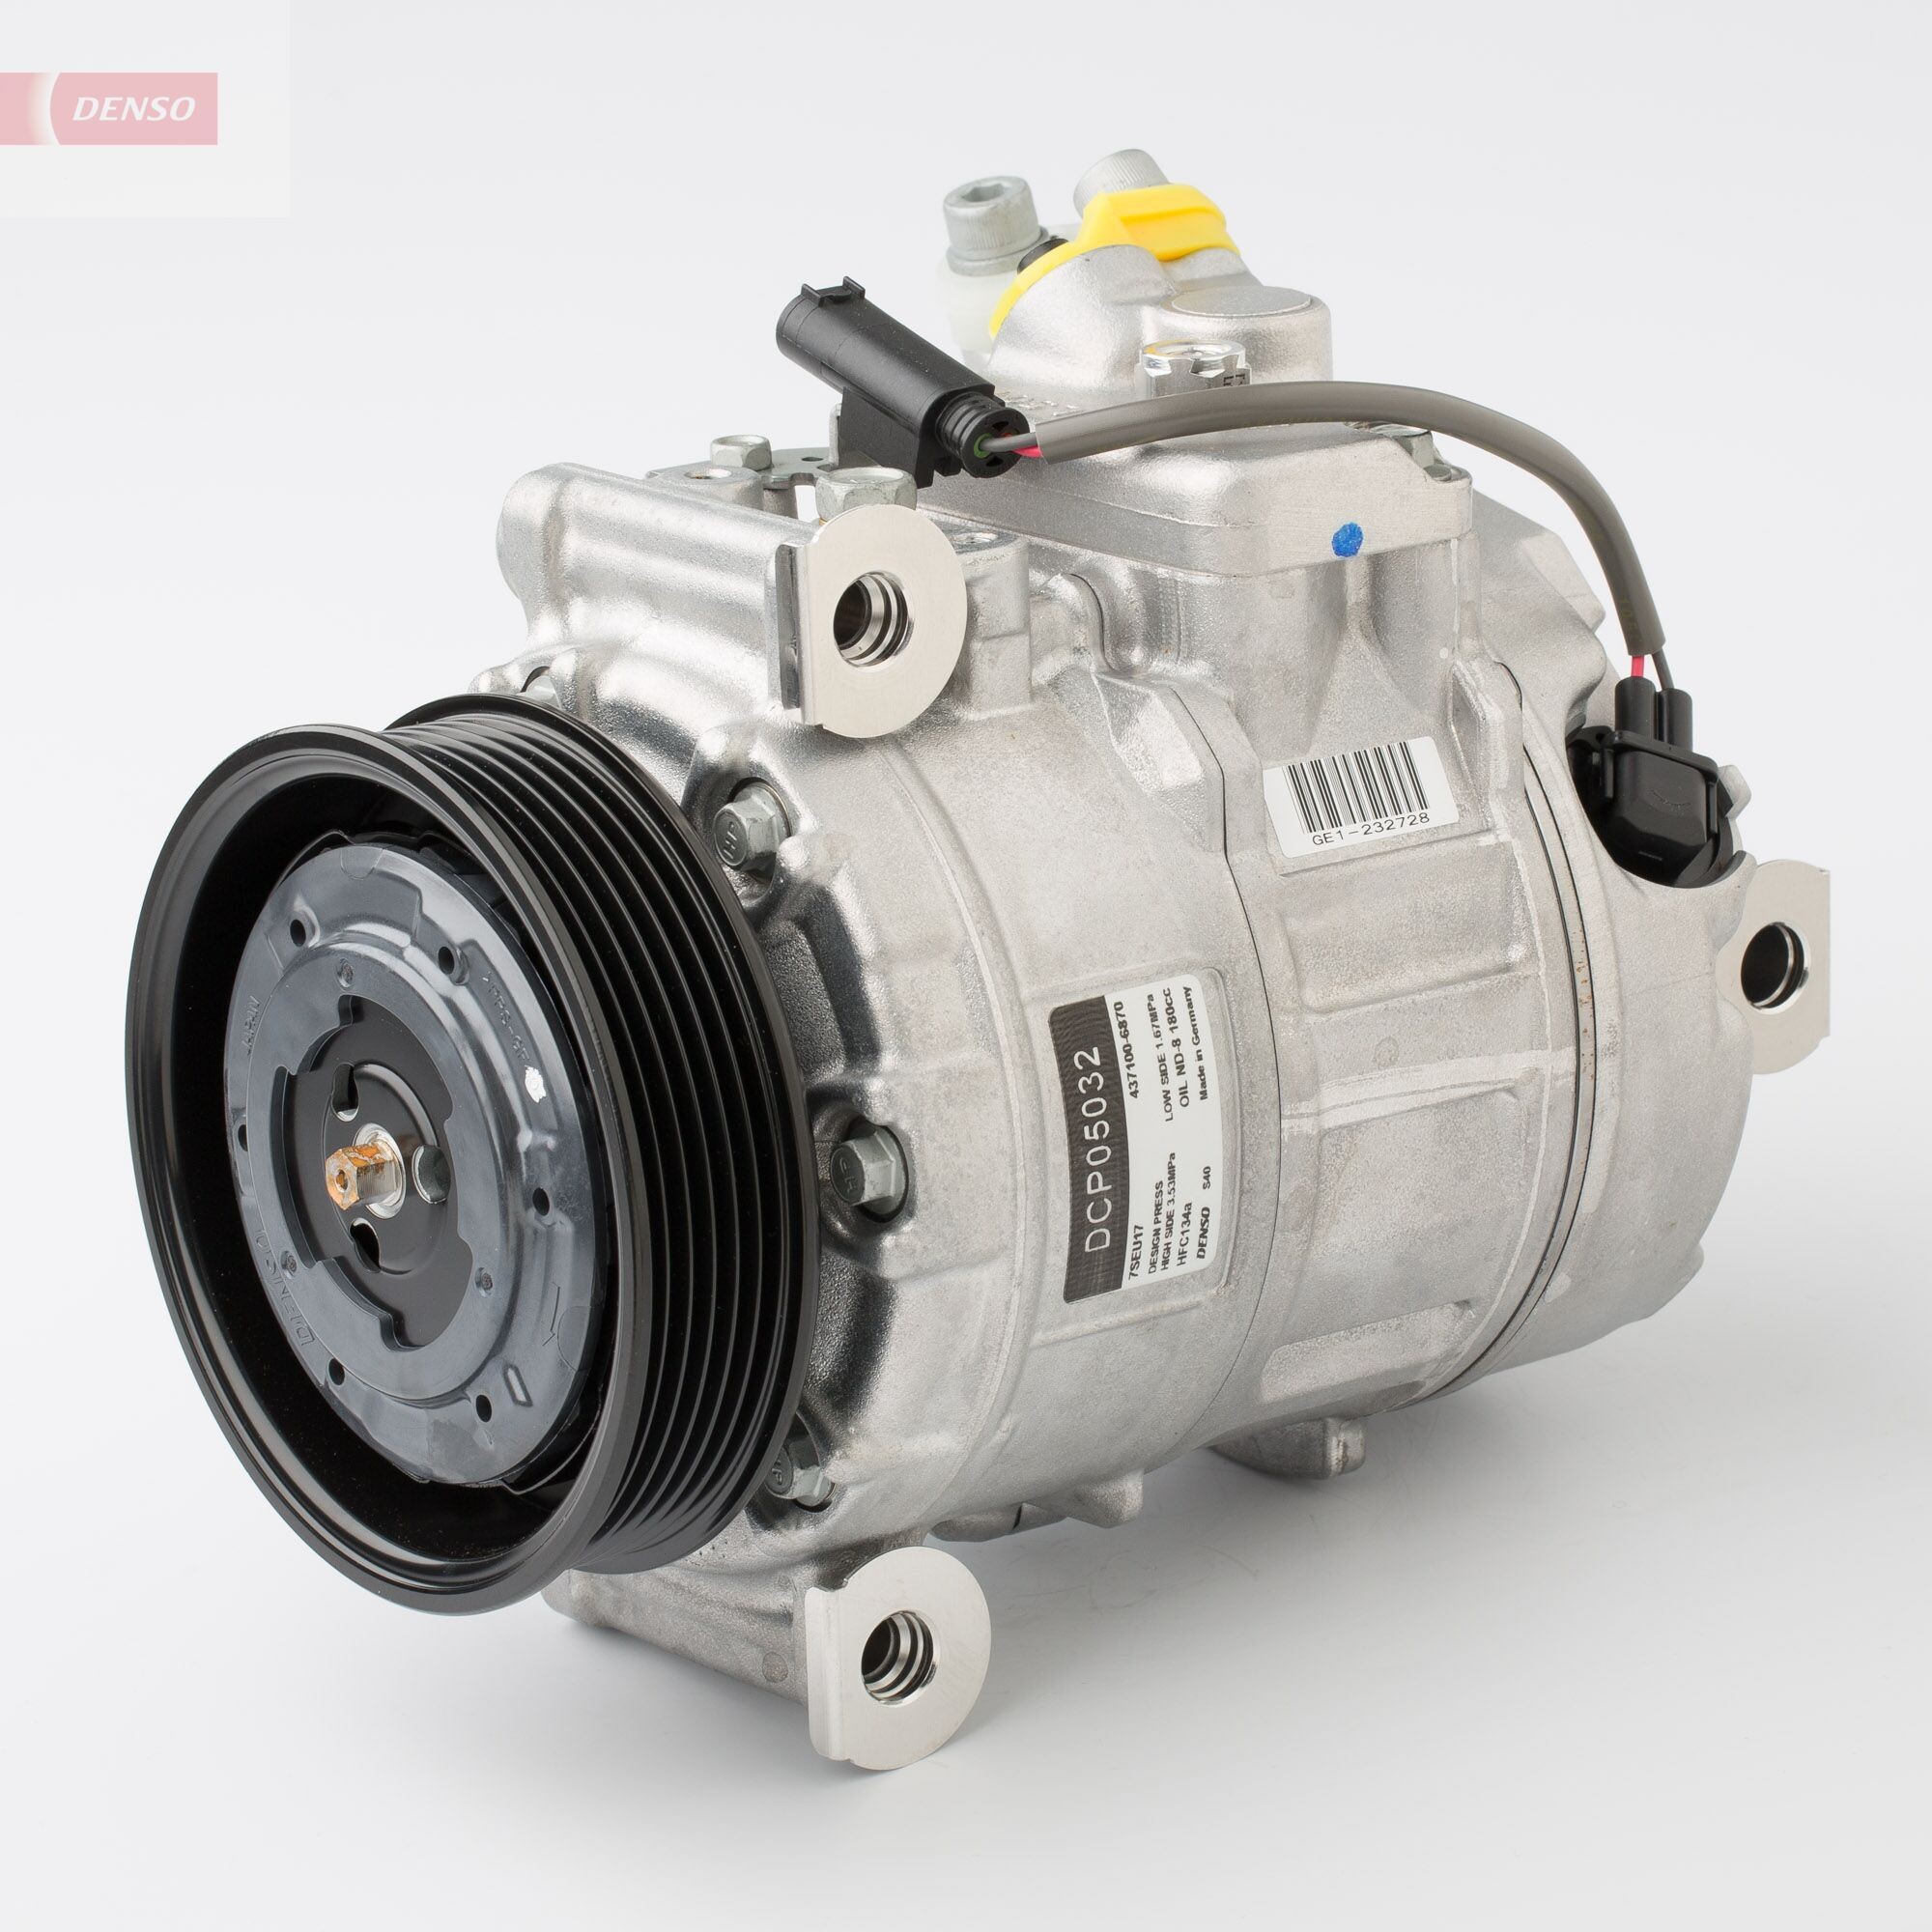 DENSO Air conditioning compressor DCP05032 BMW 5 Series 2009